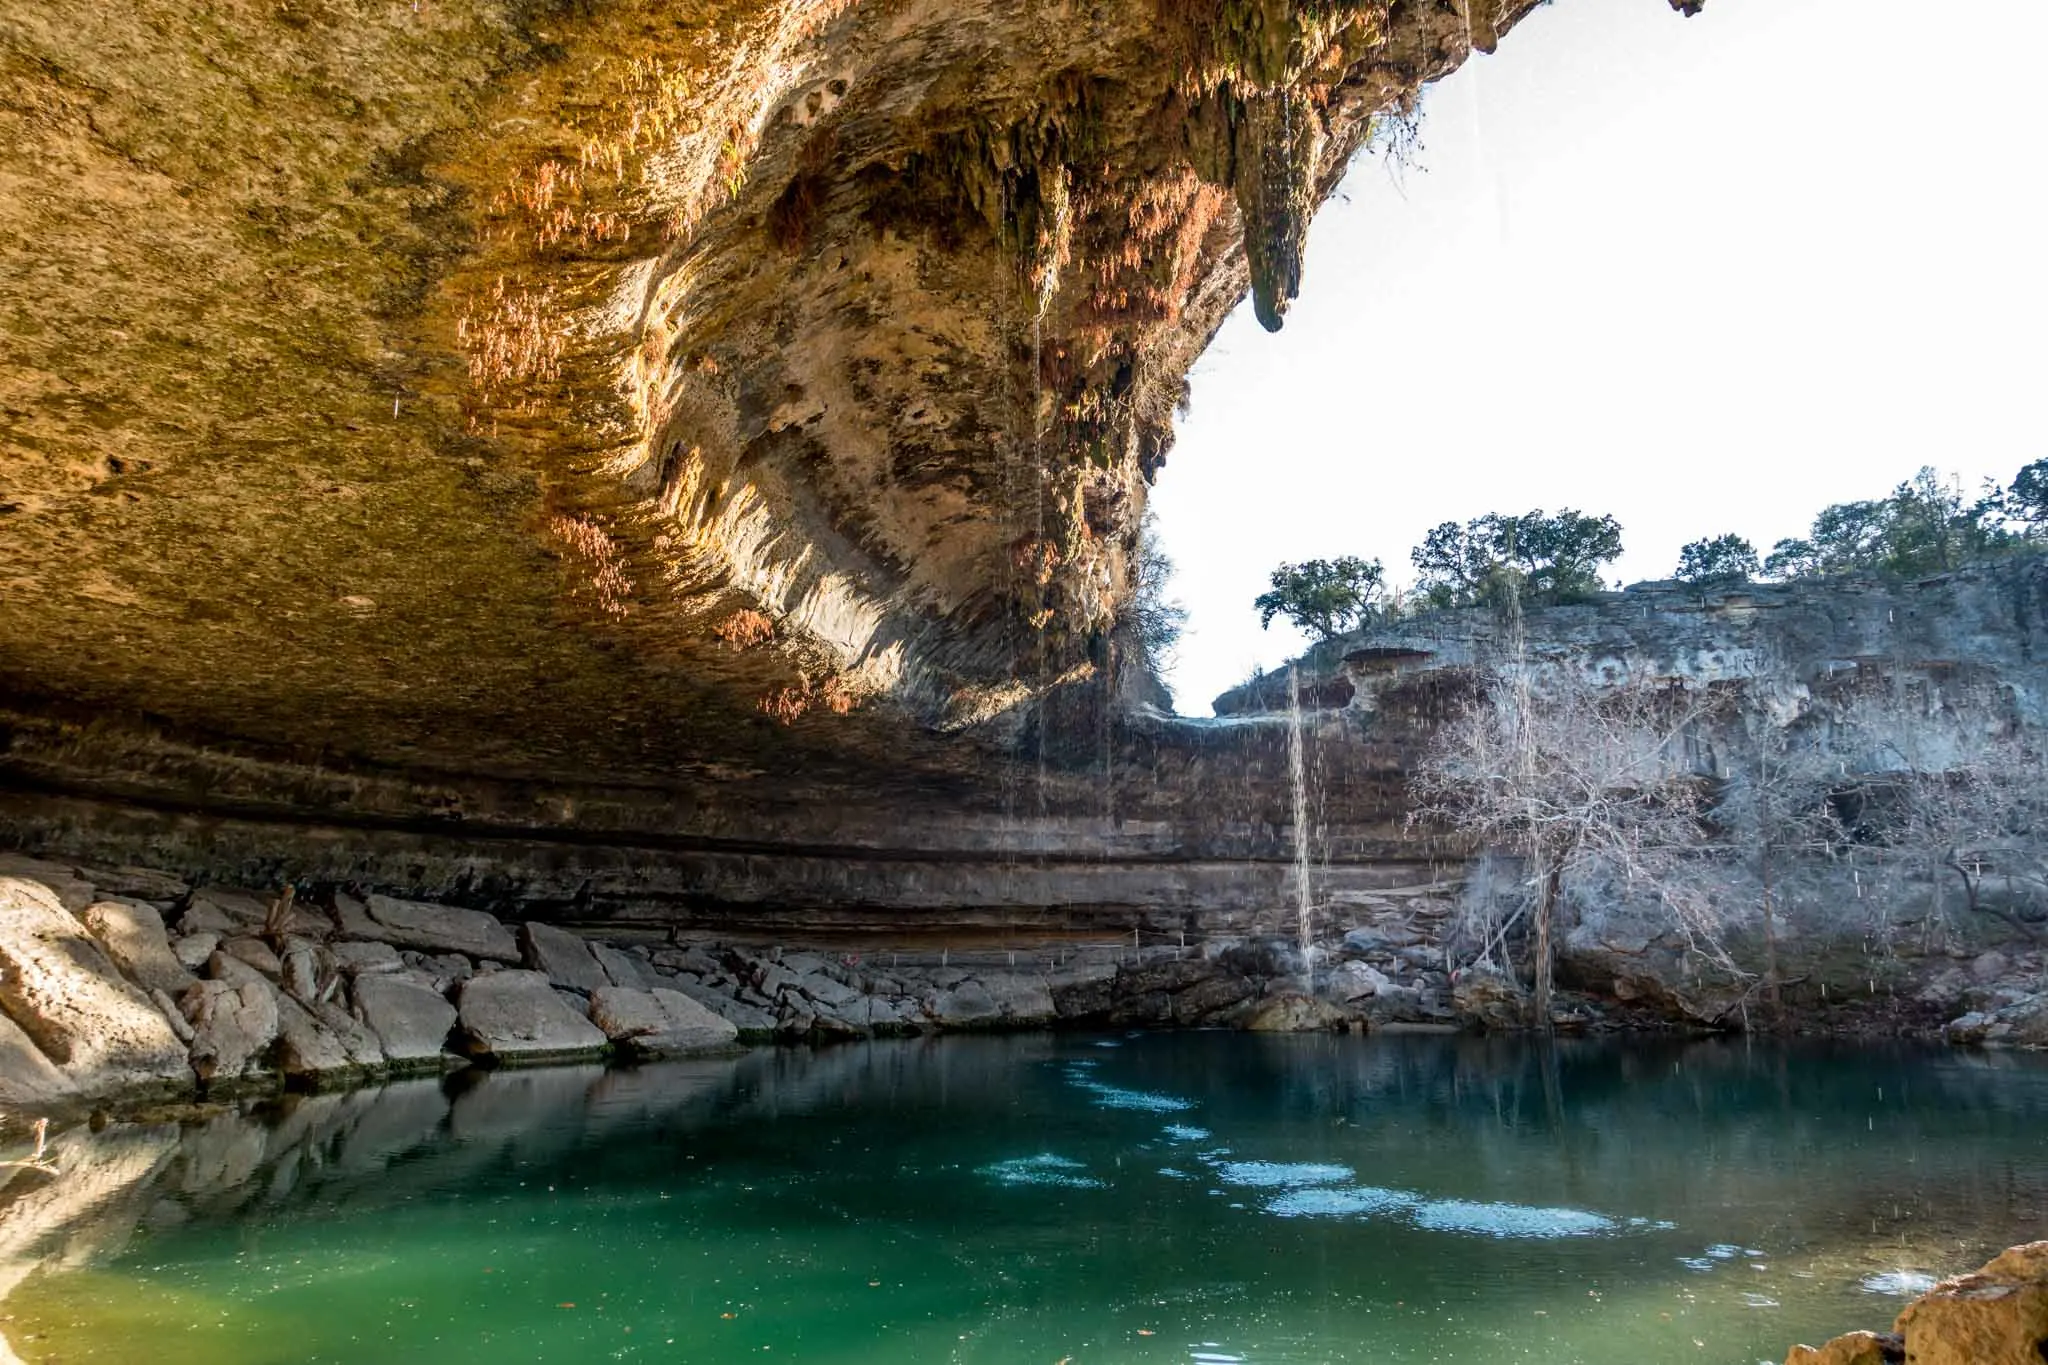 Water dripping into a large natural pool